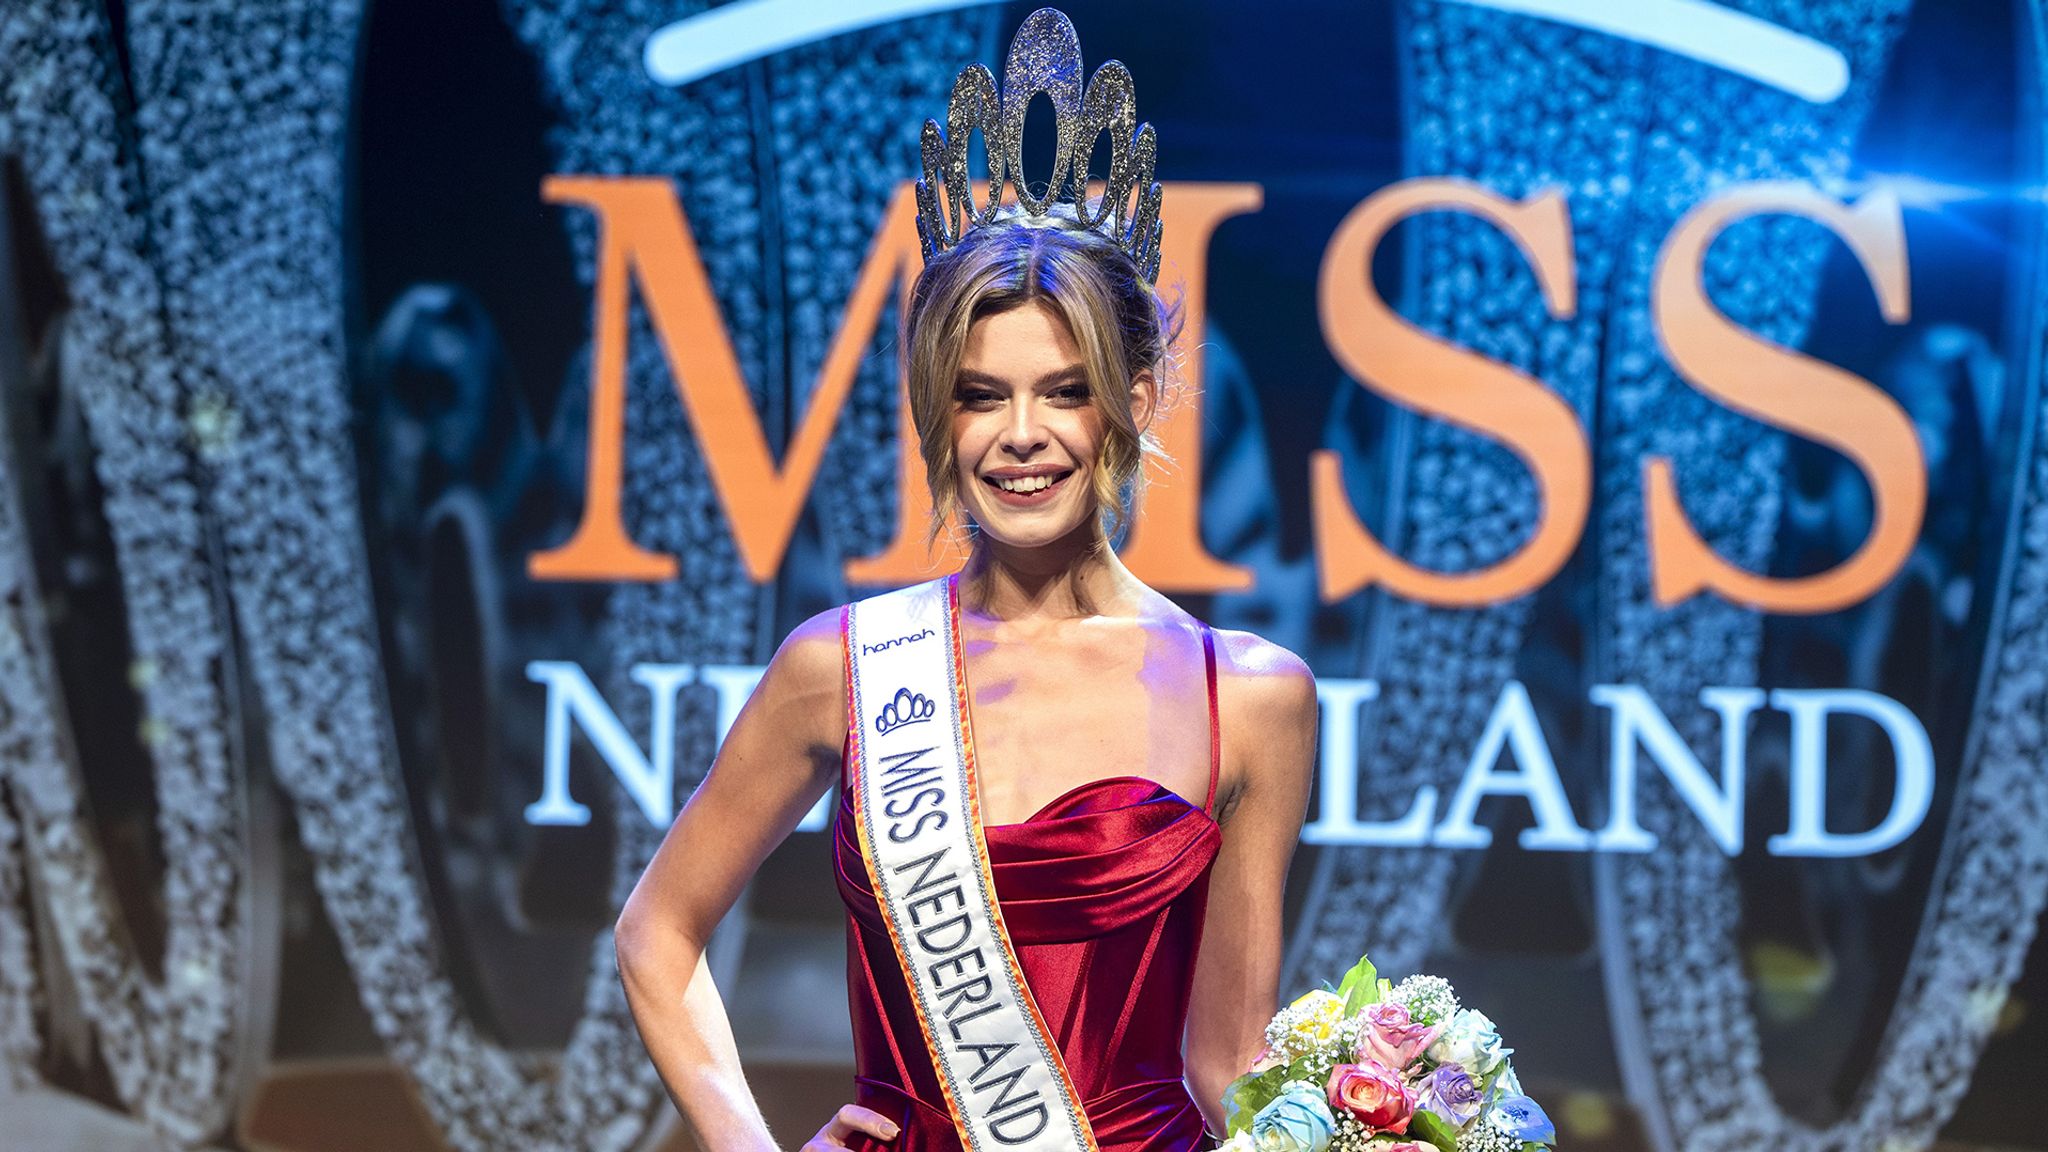 Rikkie Kollé Makes History as the First Transgender Woman to Win Miss Netherlands